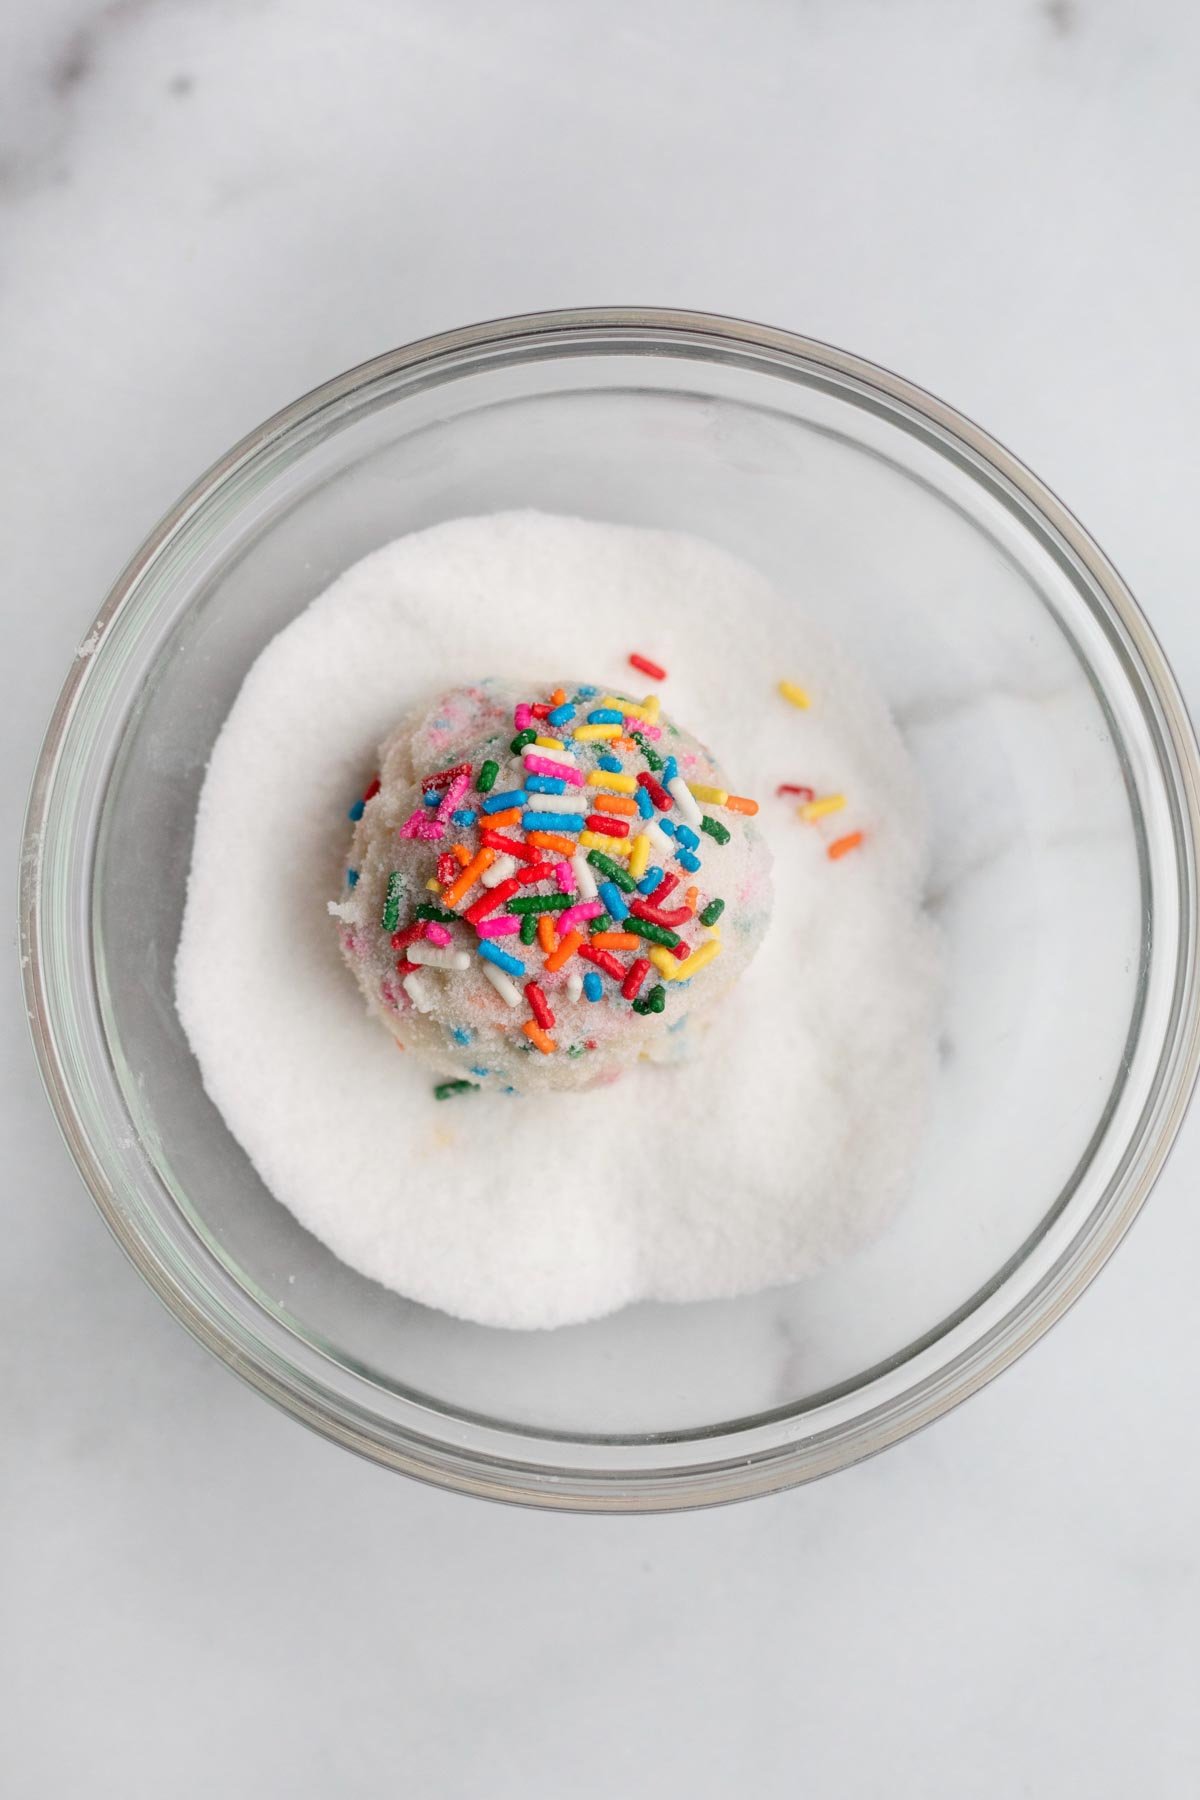 A rainbow sprinkled ball of dough in a bowl of sugar.